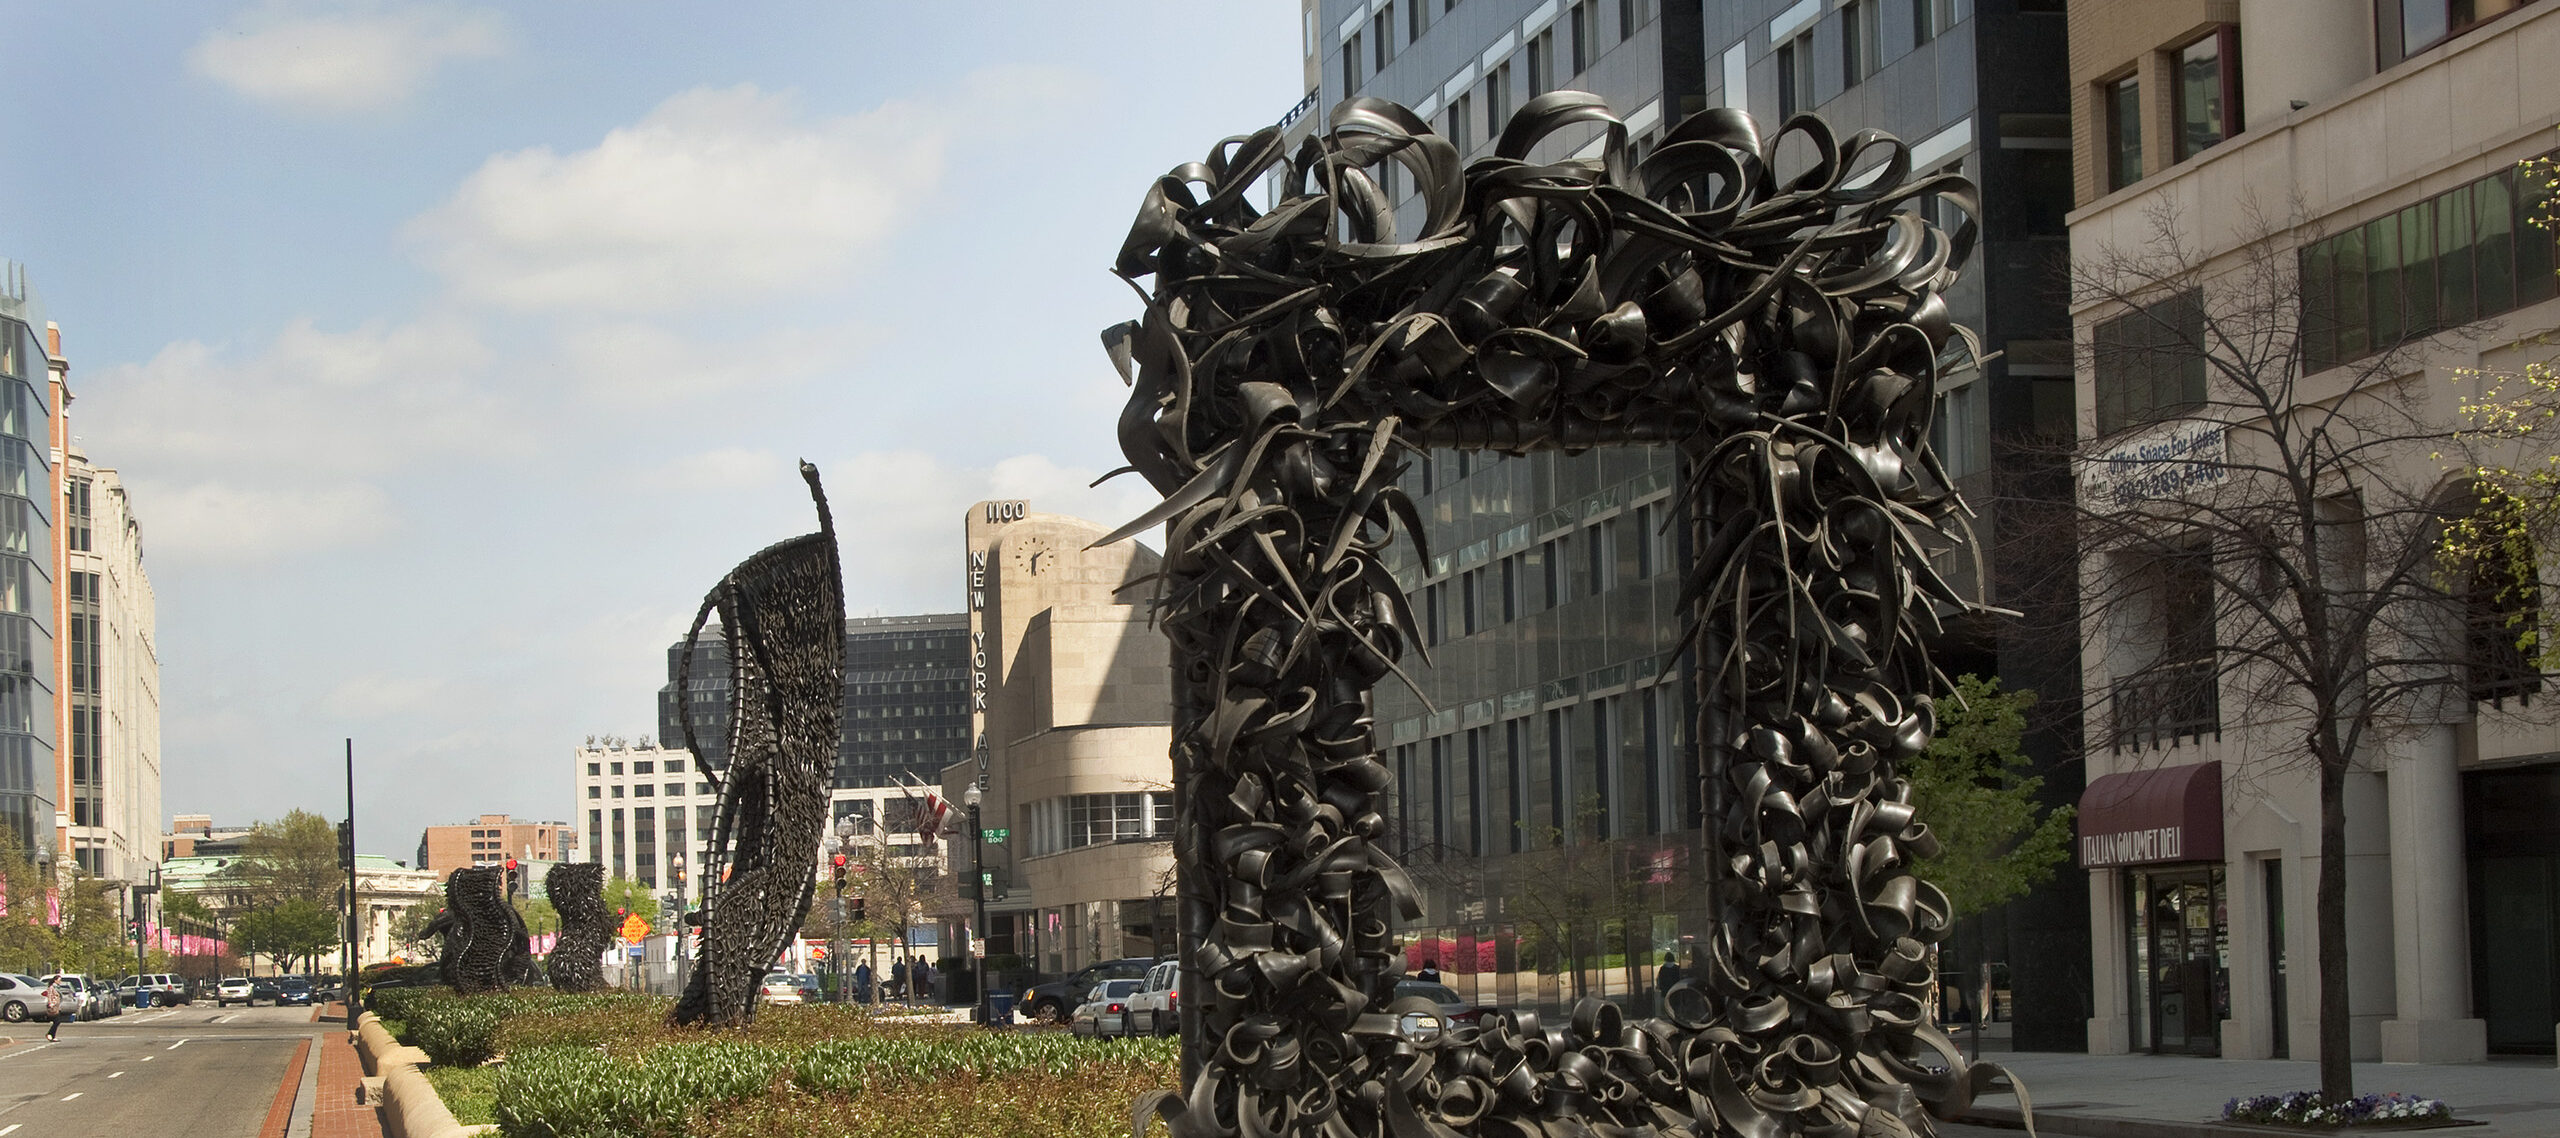 A large metal sculpture stands in the middle of the street, similar to an empty rectangular picture frame. The “frame” is crowded with undulating, coiling metal sculptural elements that occasionally end in spikes. Behind stand three vertical twisting, net-like metal sculptures.